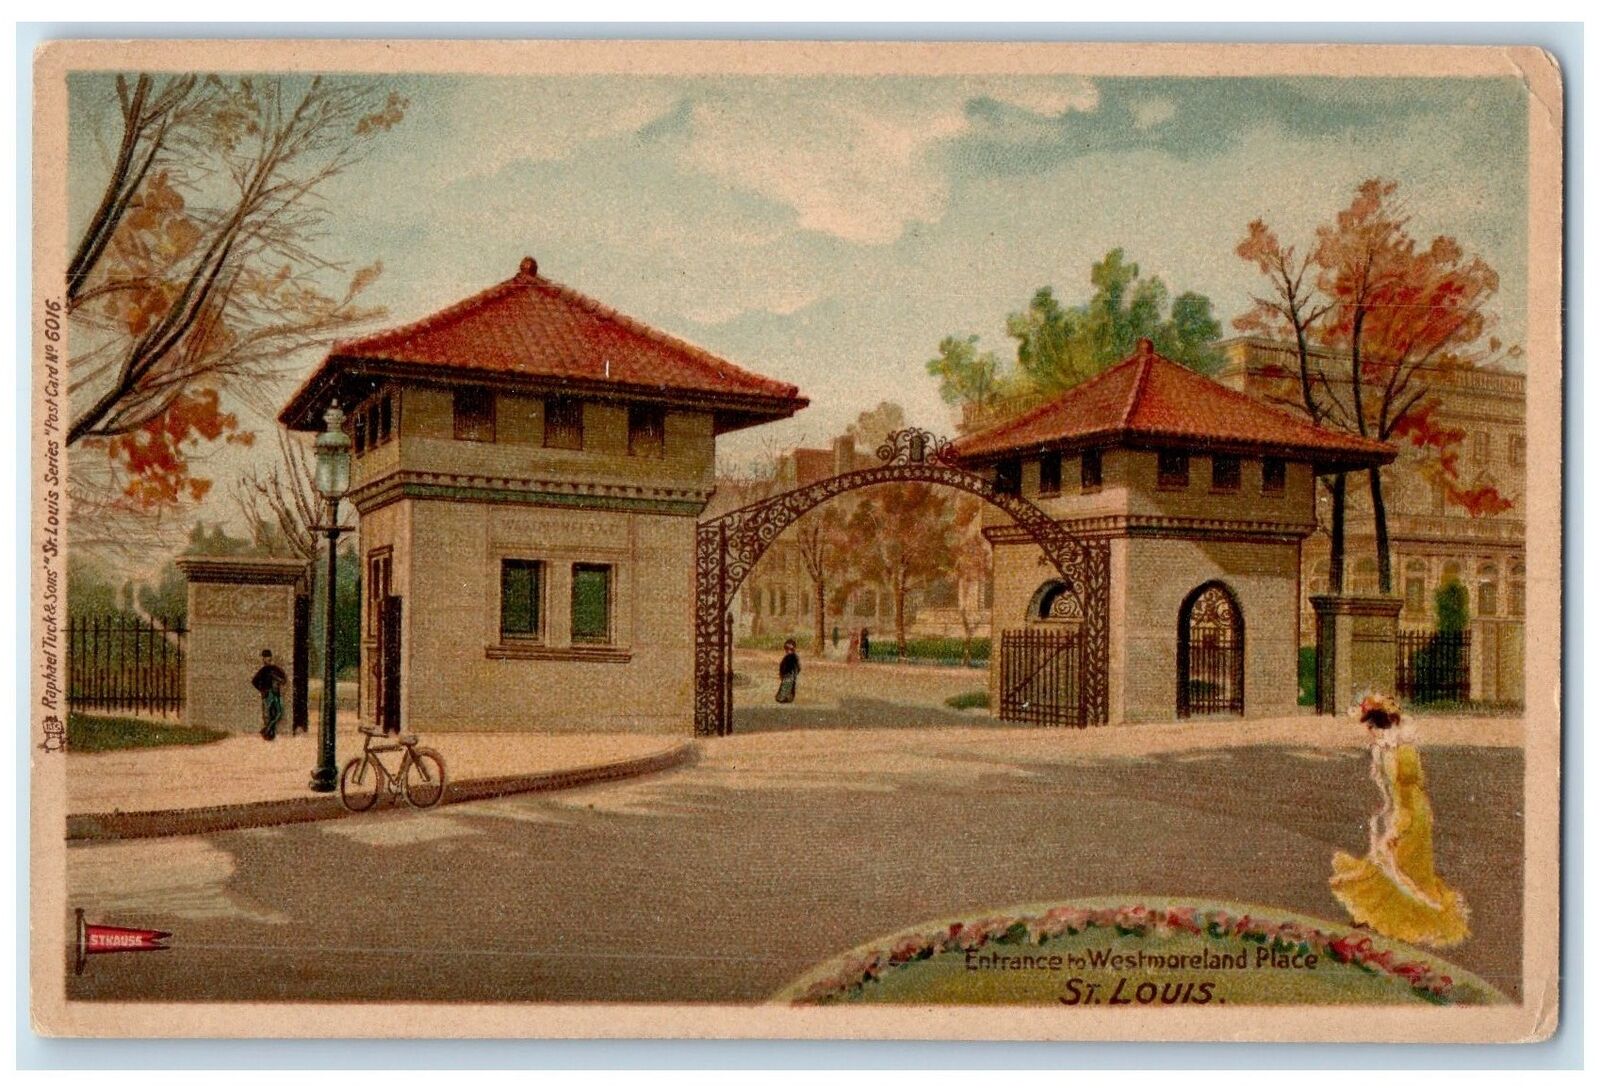 c1905s Entrance To Westmoreland Place Trees St. Louis Missouri MO Tuck Postcard